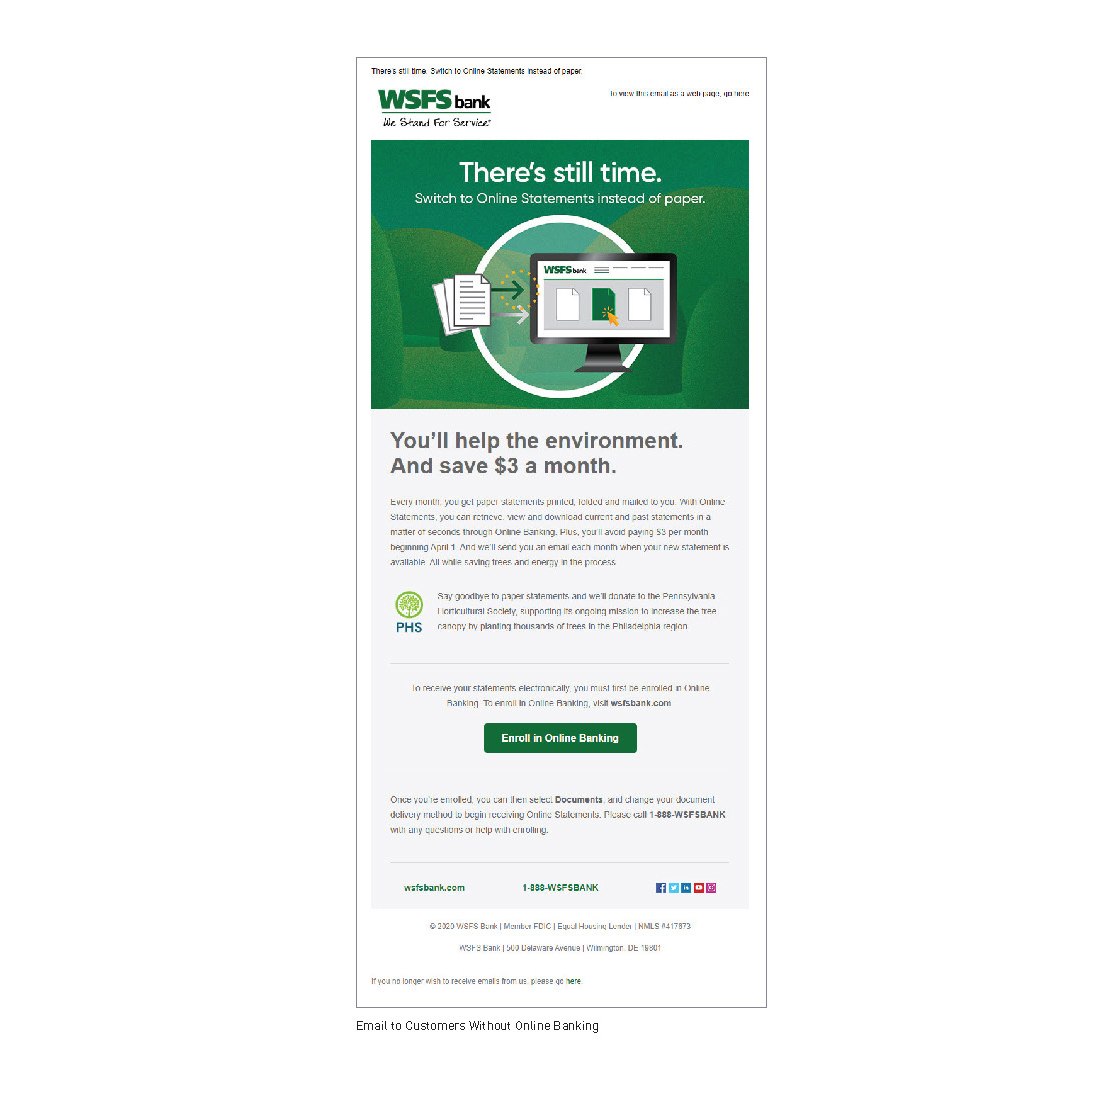 WSFS/Beneficial Merger Post Conversion Friction Mitigation (Campus Banking Emails) sample